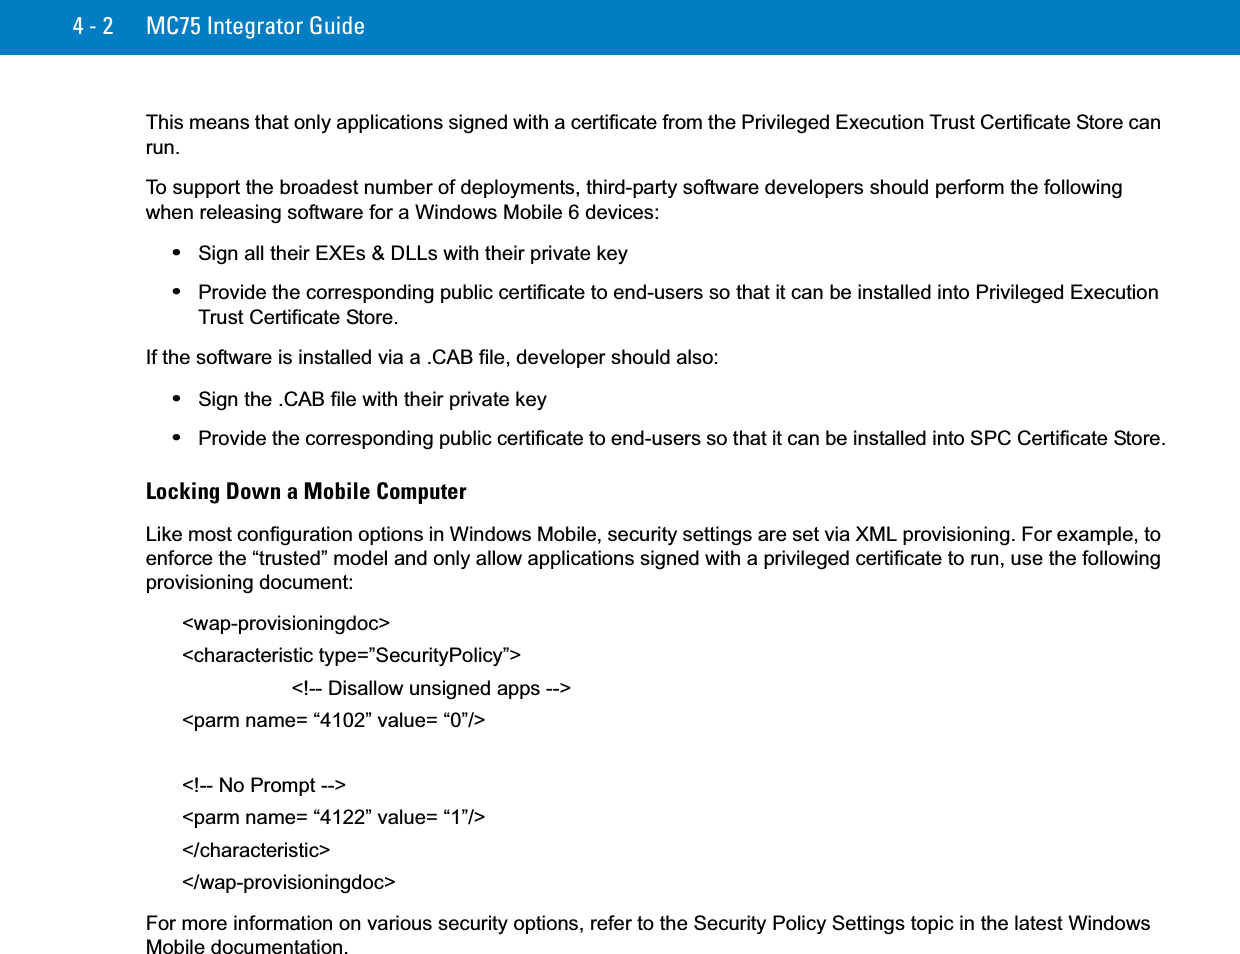 4 - 2 MC75 Integrator GuideThis means that only applications signed with a certificate from the Privileged Execution Trust Certificate Store can run.To support the broadest number of deployments, third-party software developers should perform the following when releasing software for a Windows Mobile 6 devices:•Sign all their EXEs &amp; DLLs with their private key•Provide the corresponding public certificate to end-users so that it can be installed into Privileged Execution Trust Certificate Store.If the software is installed via a .CAB file, developer should also:•Sign the .CAB file with their private key•Provide the corresponding public certificate to end-users so that it can be installed into SPC Certificate Store.Locking Down a Mobile ComputerLike most configuration options in Windows Mobile, security settings are set via XML provisioning. For example, to enforce the “trusted” model and only allow applications signed with a privileged certificate to run, use the following provisioning document:&lt;wap-provisioningdoc&gt;&lt;characteristic type=”SecurityPolicy”&gt; &lt;!-- Disallow unsigned apps --&gt;&lt;parm name= “4102” value= “0”/&gt; &lt;!-- No Prompt --&gt;&lt;parm name= “4122” value= “1”/&gt; &lt;/characteristic&gt;&lt;/wap-provisioningdoc&gt; For more information on various security options, refer to the Security Policy Settings topic in the latest Windows Mobile documentation.